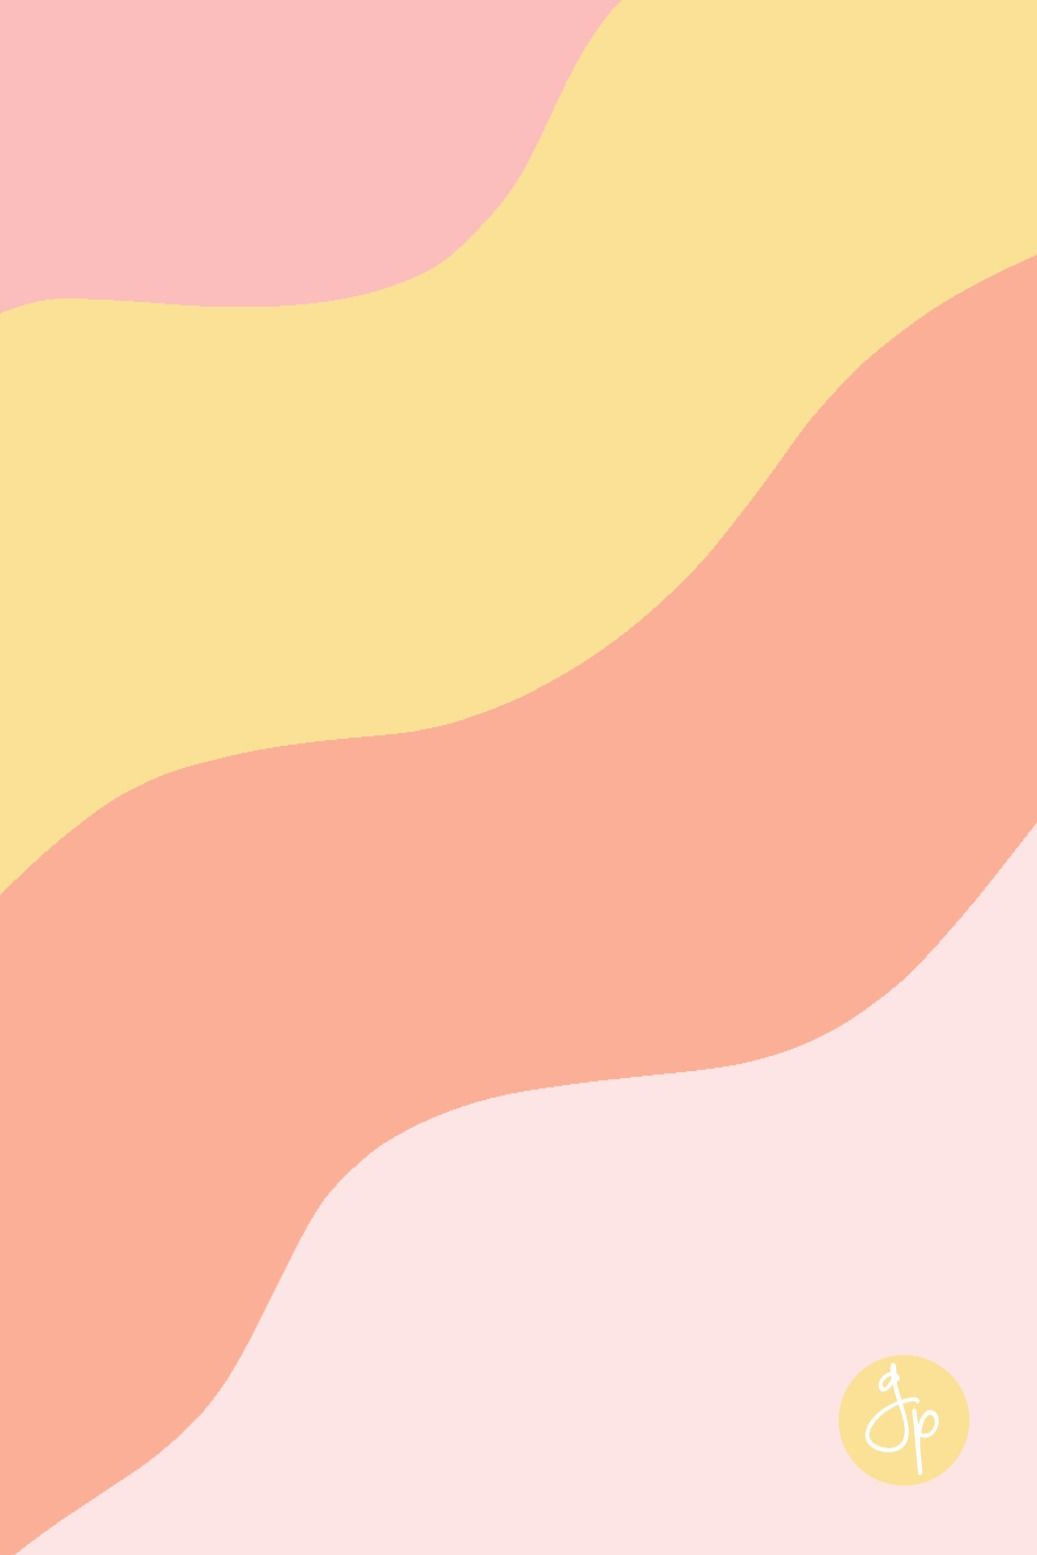 A phone wallpaper with pastel pink, yellow and orange wave shapes and the DP logo in the bottom right corner. - Salmon